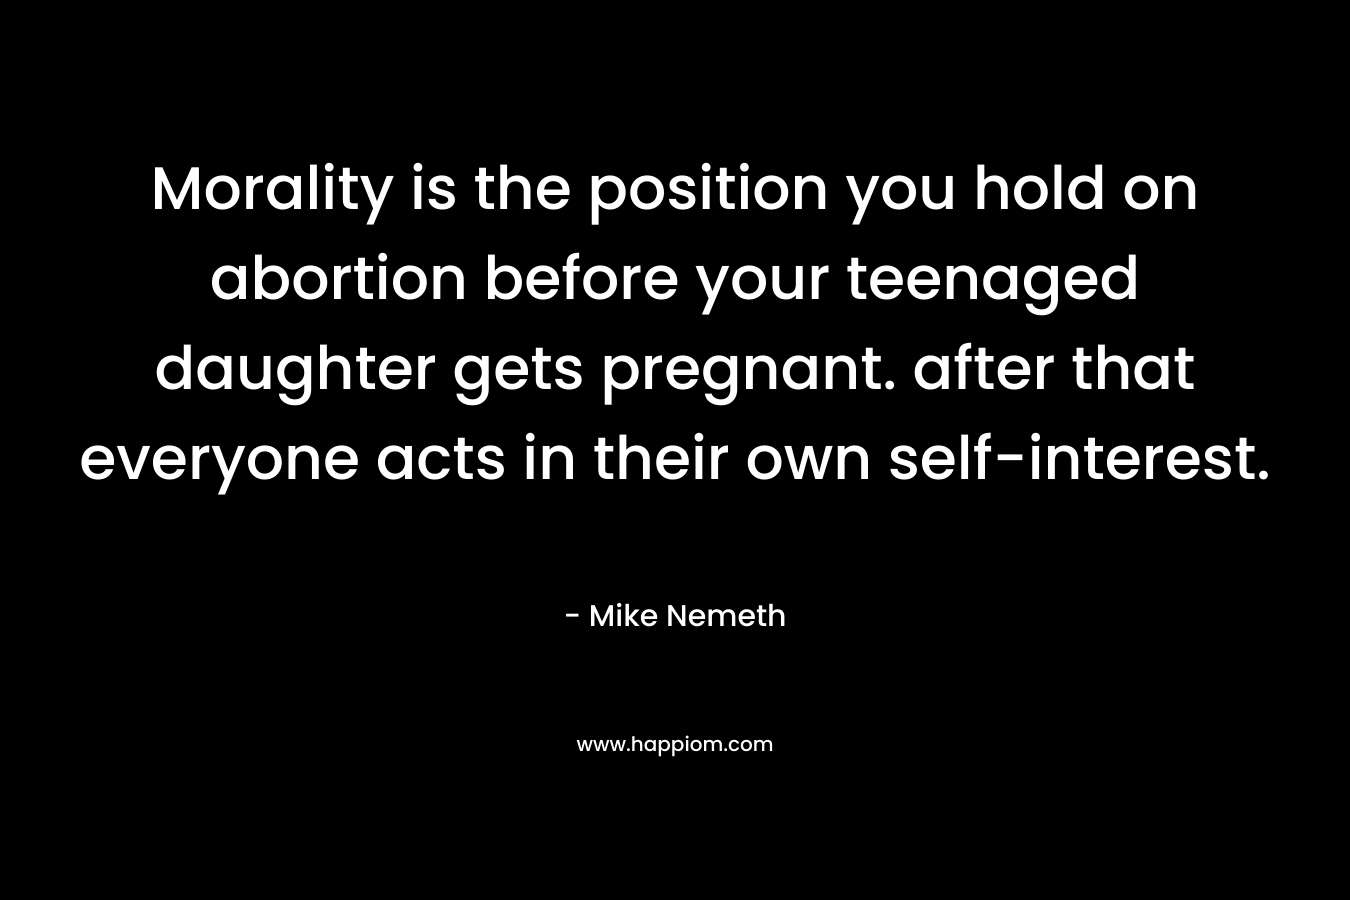 Morality is the position you hold on abortion before your teenaged daughter gets pregnant. after that everyone acts in their own self-interest. – Mike Nemeth